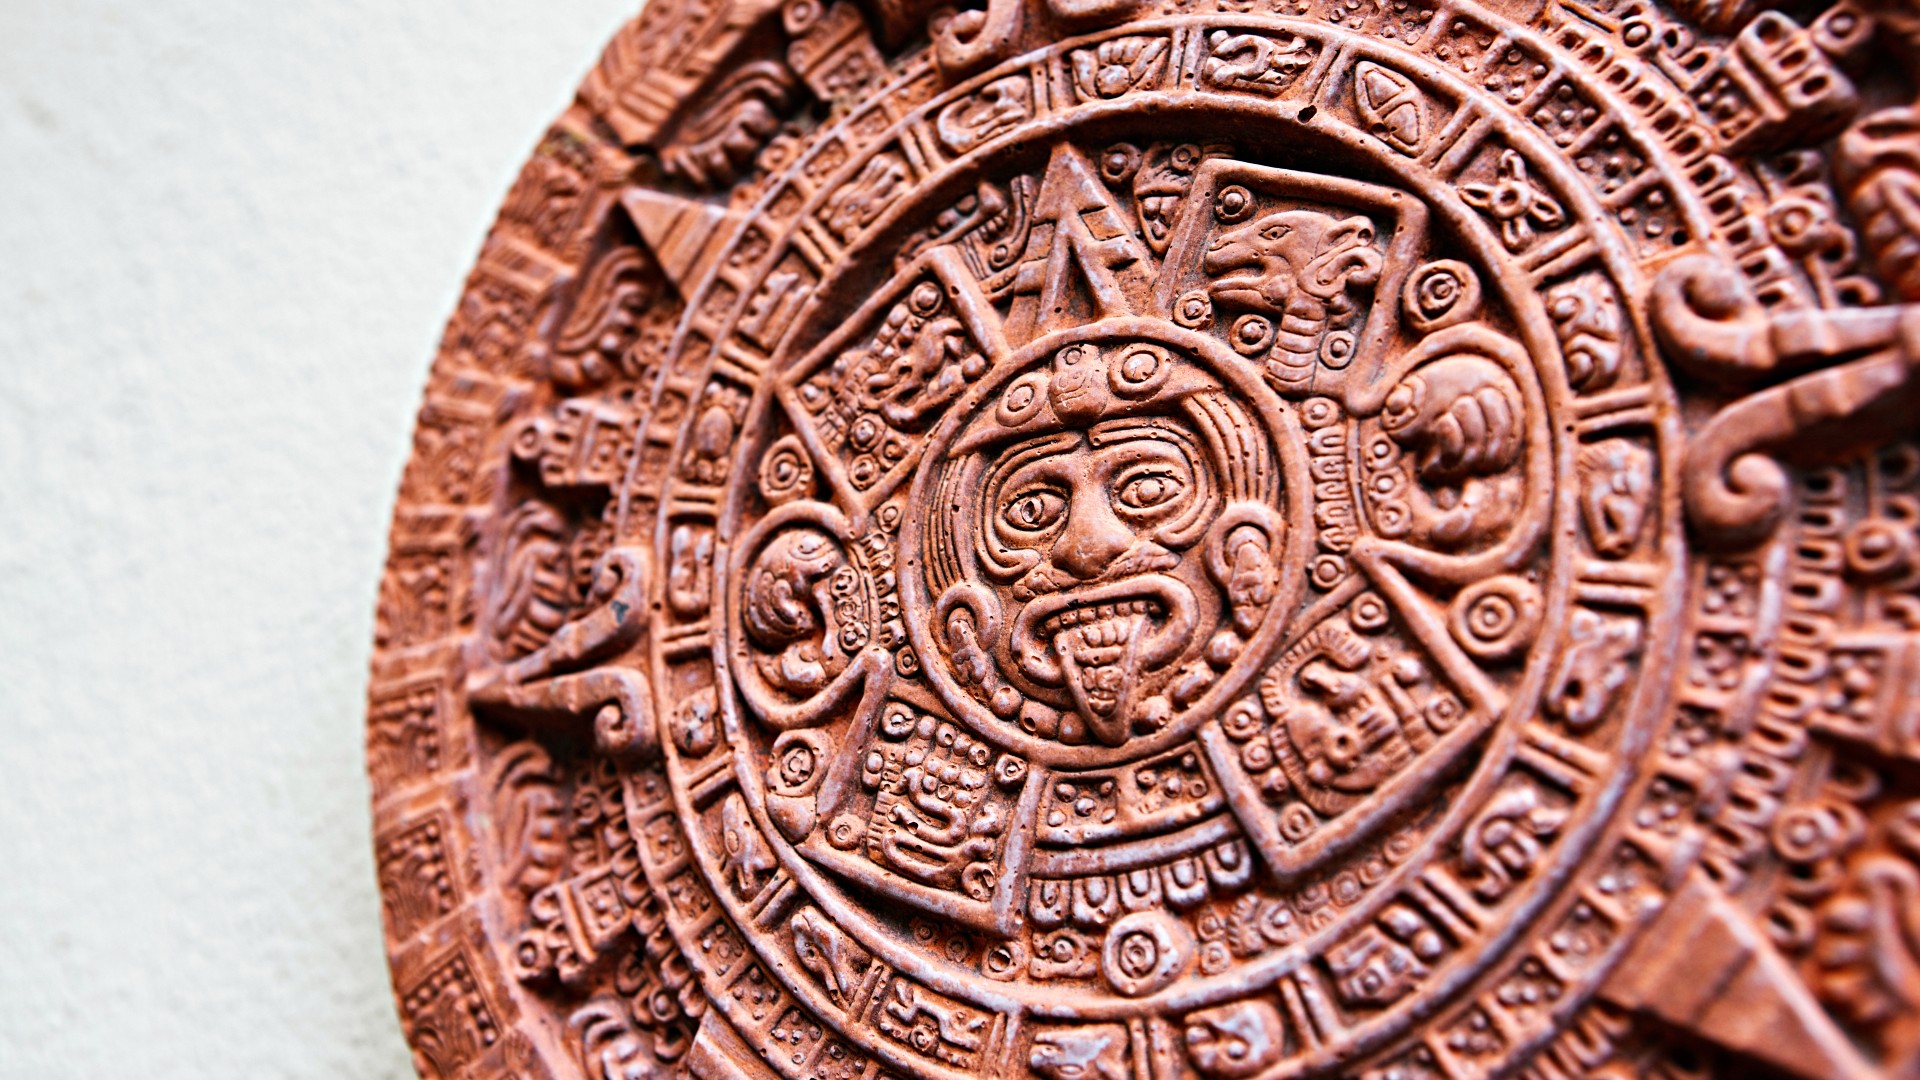 Aztec Calendar made with 7 types of wood